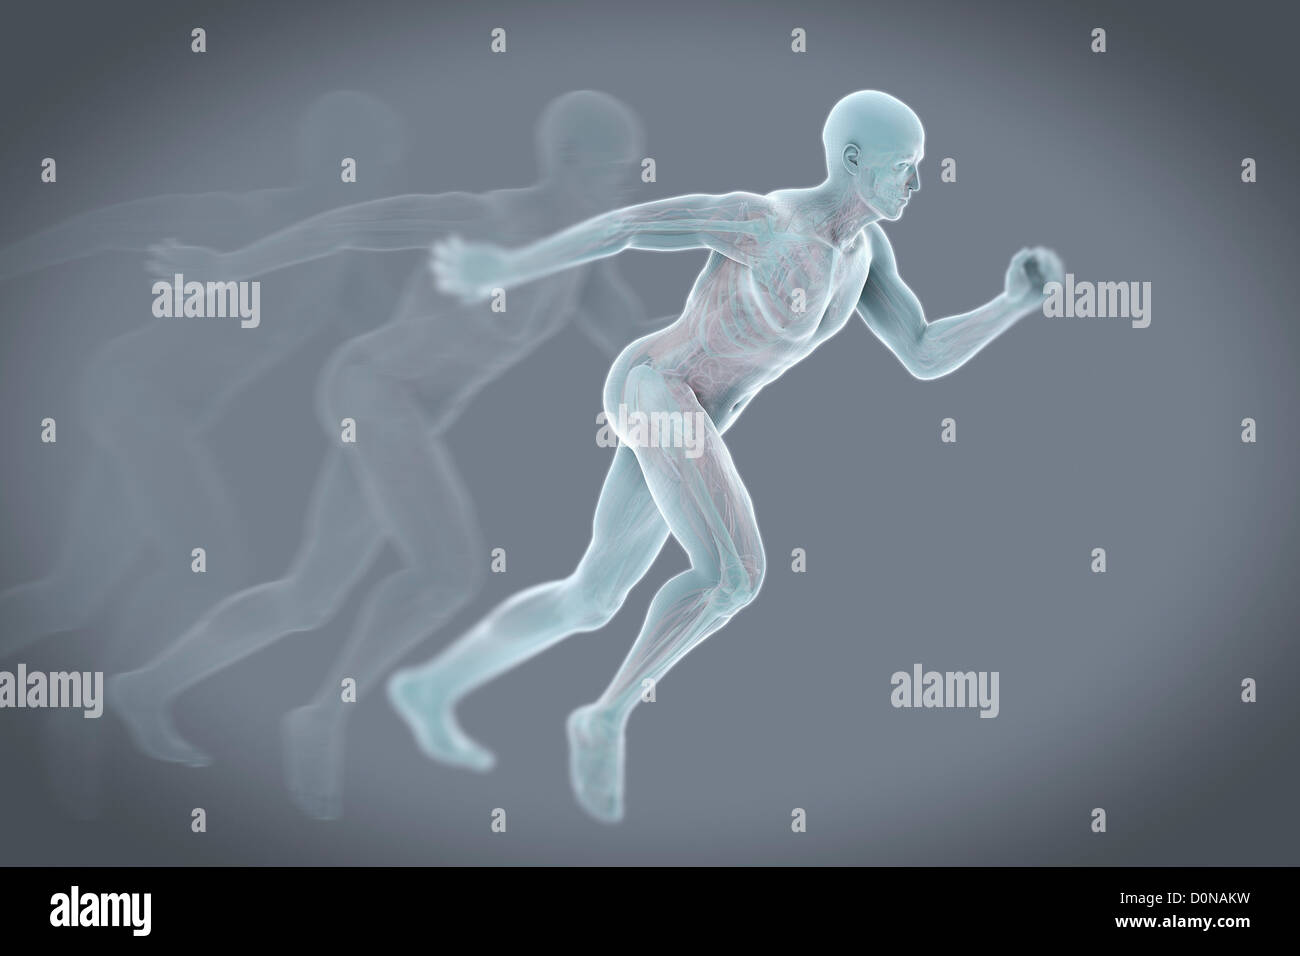 A running male figure with transparent skin to reveal the inner anatomical structures. Stock Photo